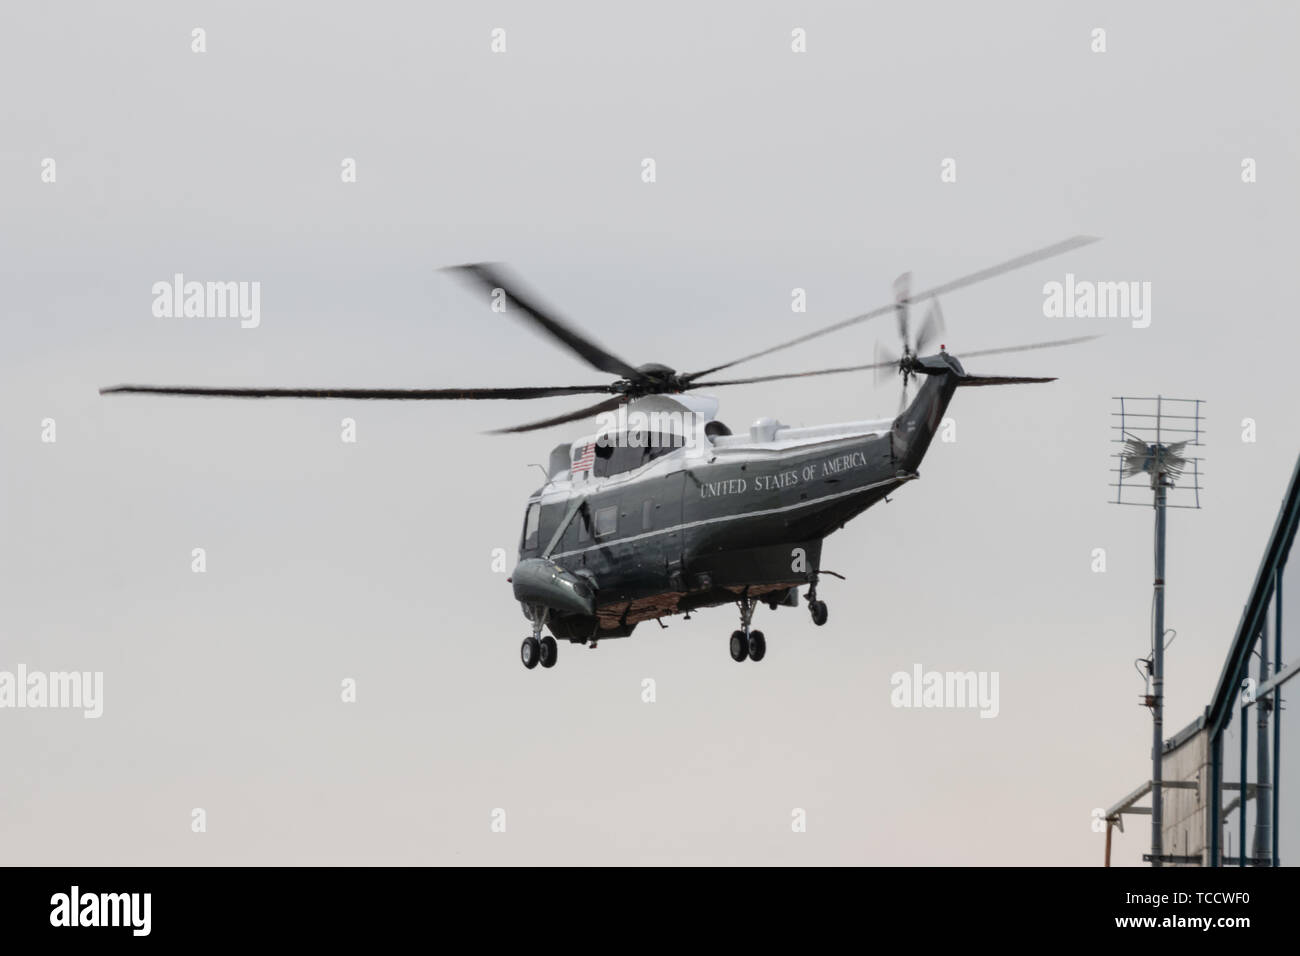 Marine one the president of the united states of america helicopter in flight Stock Photo